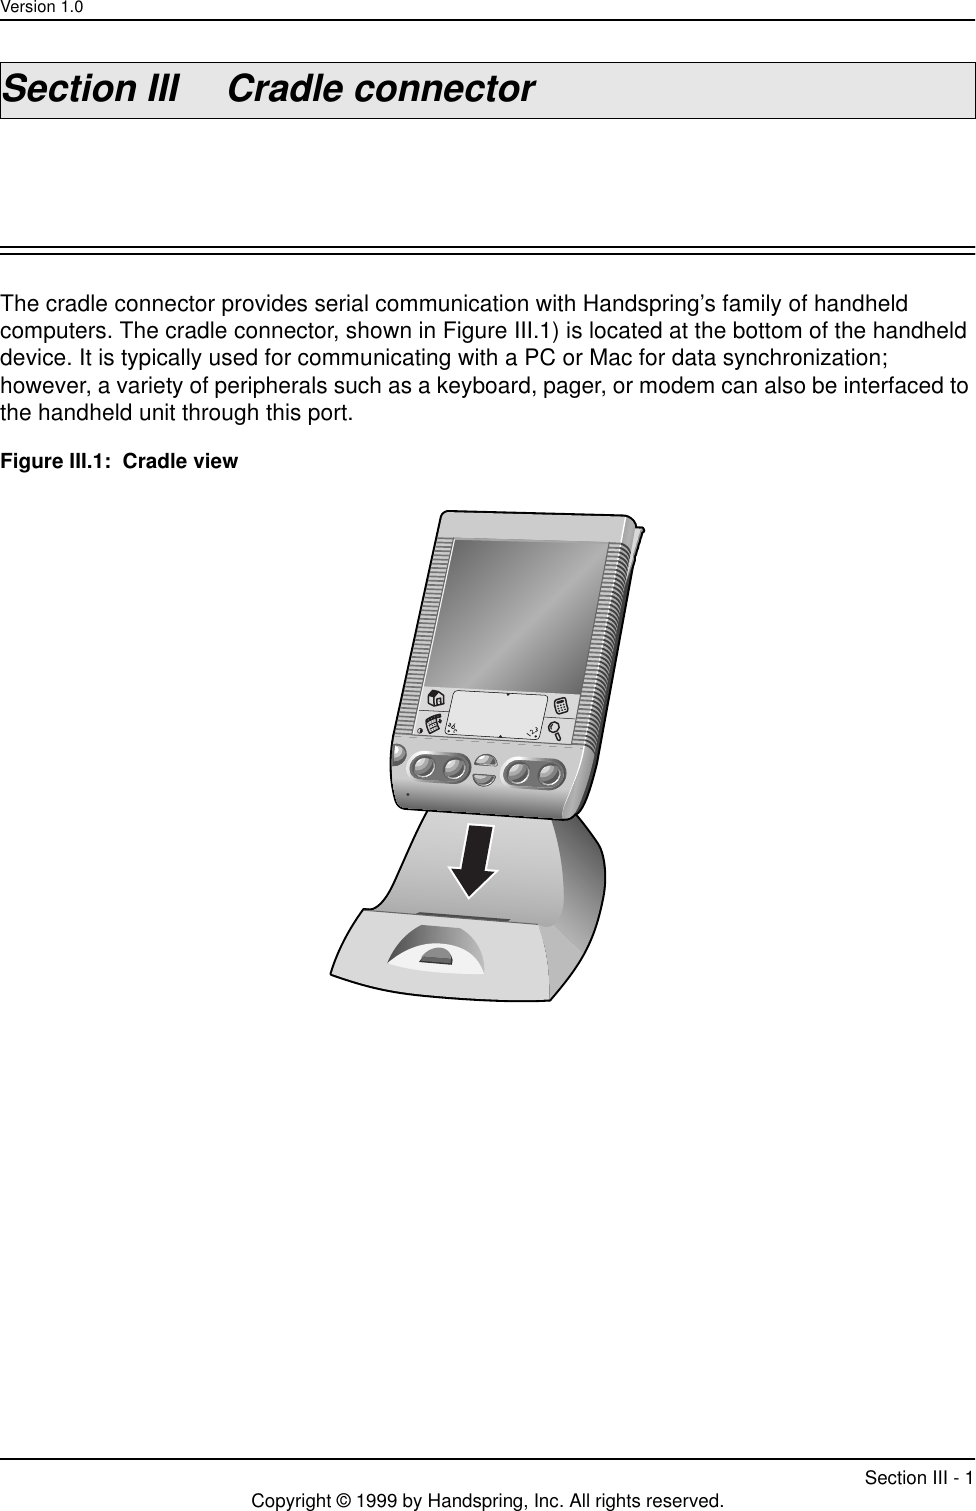 Version 1.0Section III - 1Copyright © 1999 by Handspring, Inc. All rights reserved.Section III Cradle connectorThe cradle connector provides serial communication with Handspring’s family of handheld computers. The cradle connector, shown in Figure III.1) is located at the bottom of the handheld device. It is typically used for communicating with a PC or Mac for data synchronization; however, a variety of peripherals such as a keyboard, pager, or modem can also be interfaced to the handheld unit through this port.Figure III.1:  Cradle view